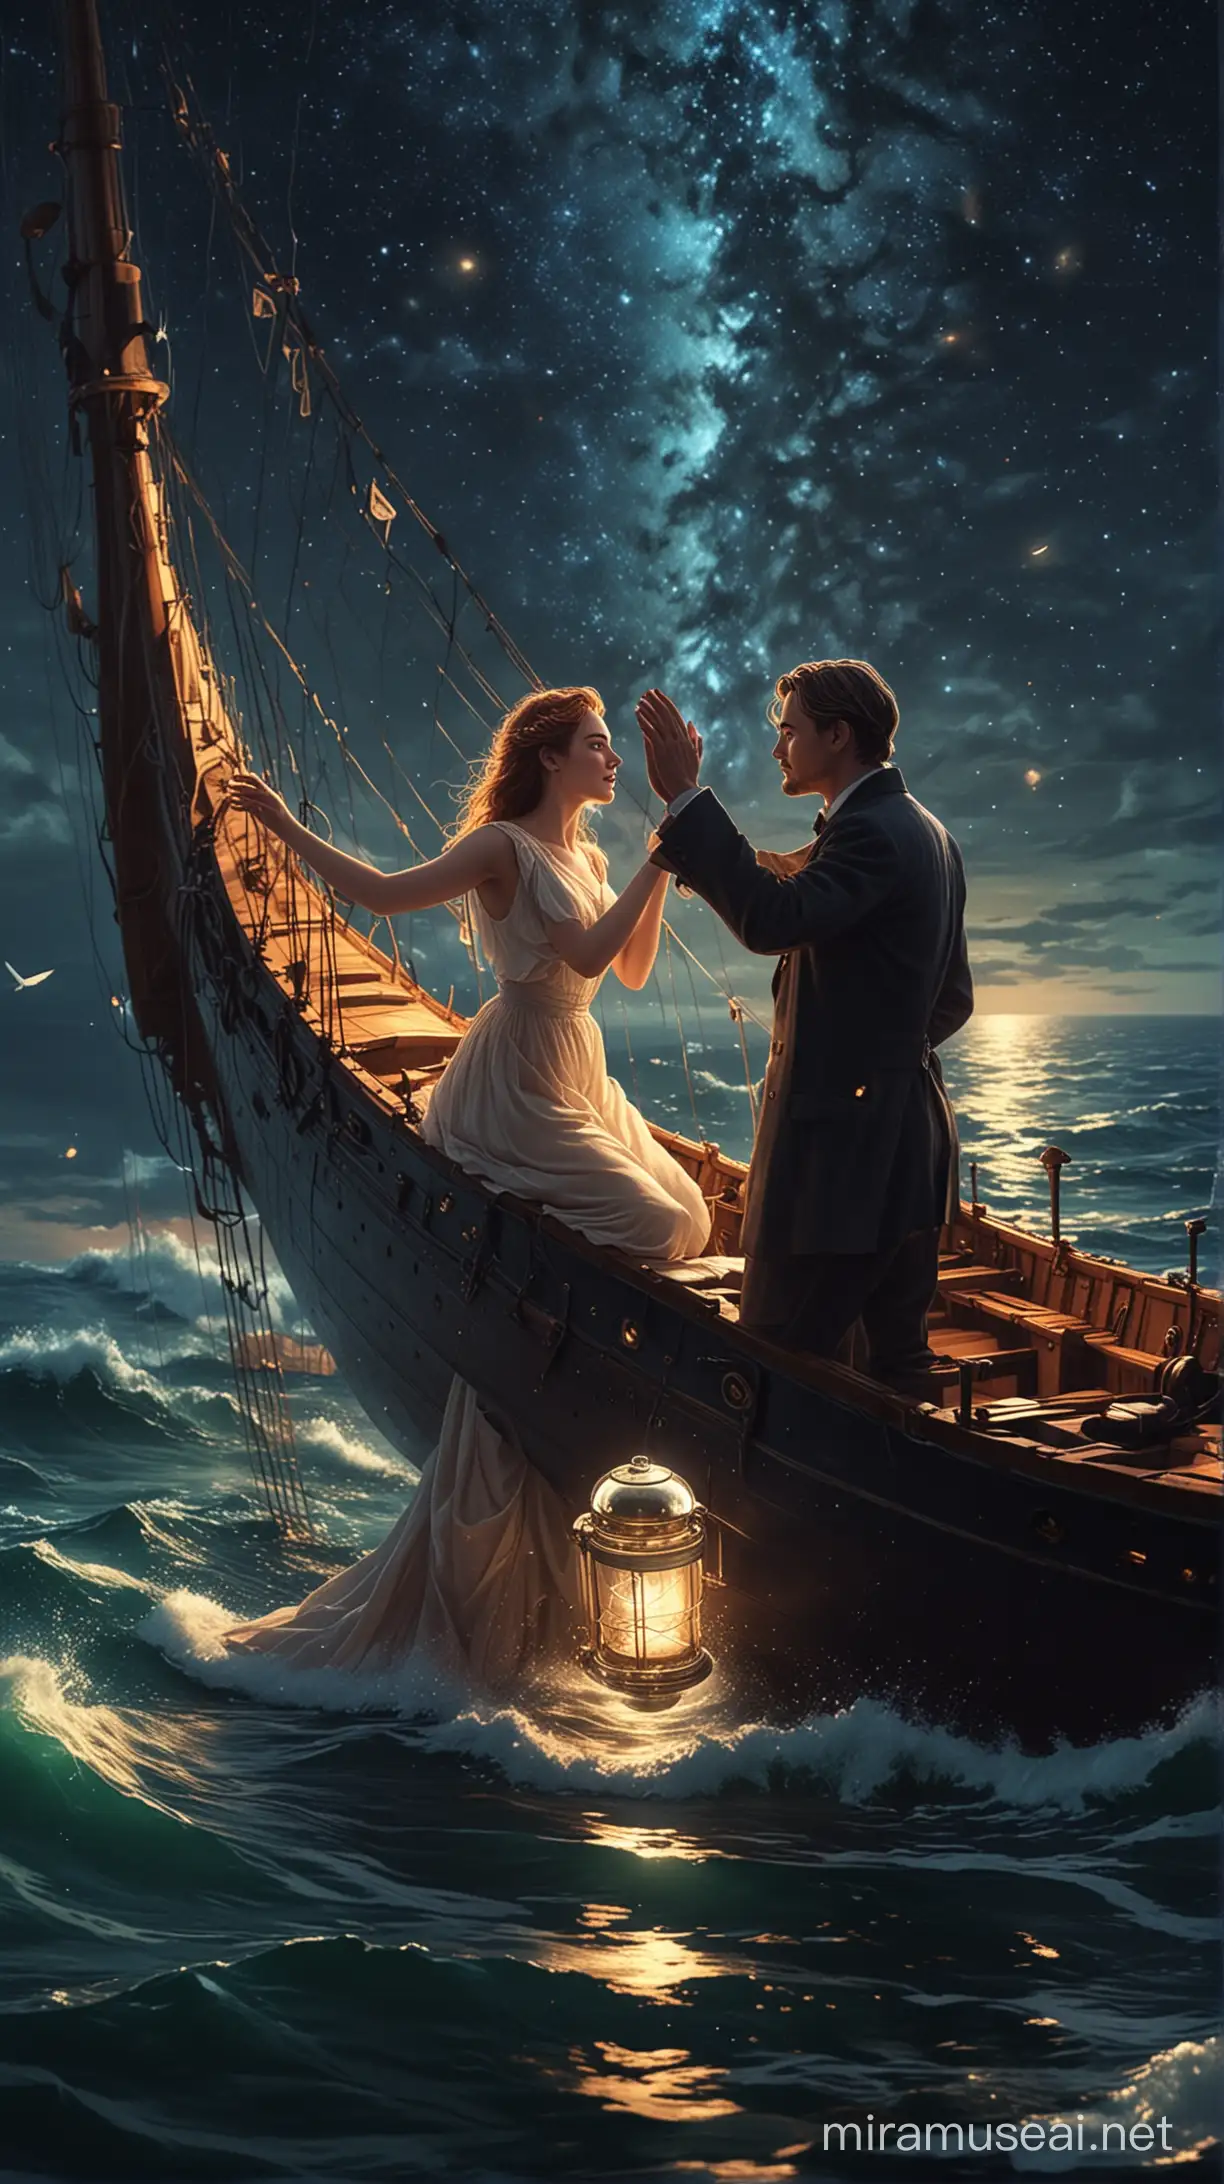 Romantic Embrace on Titanic Rose and Jack in Starlit Serenity